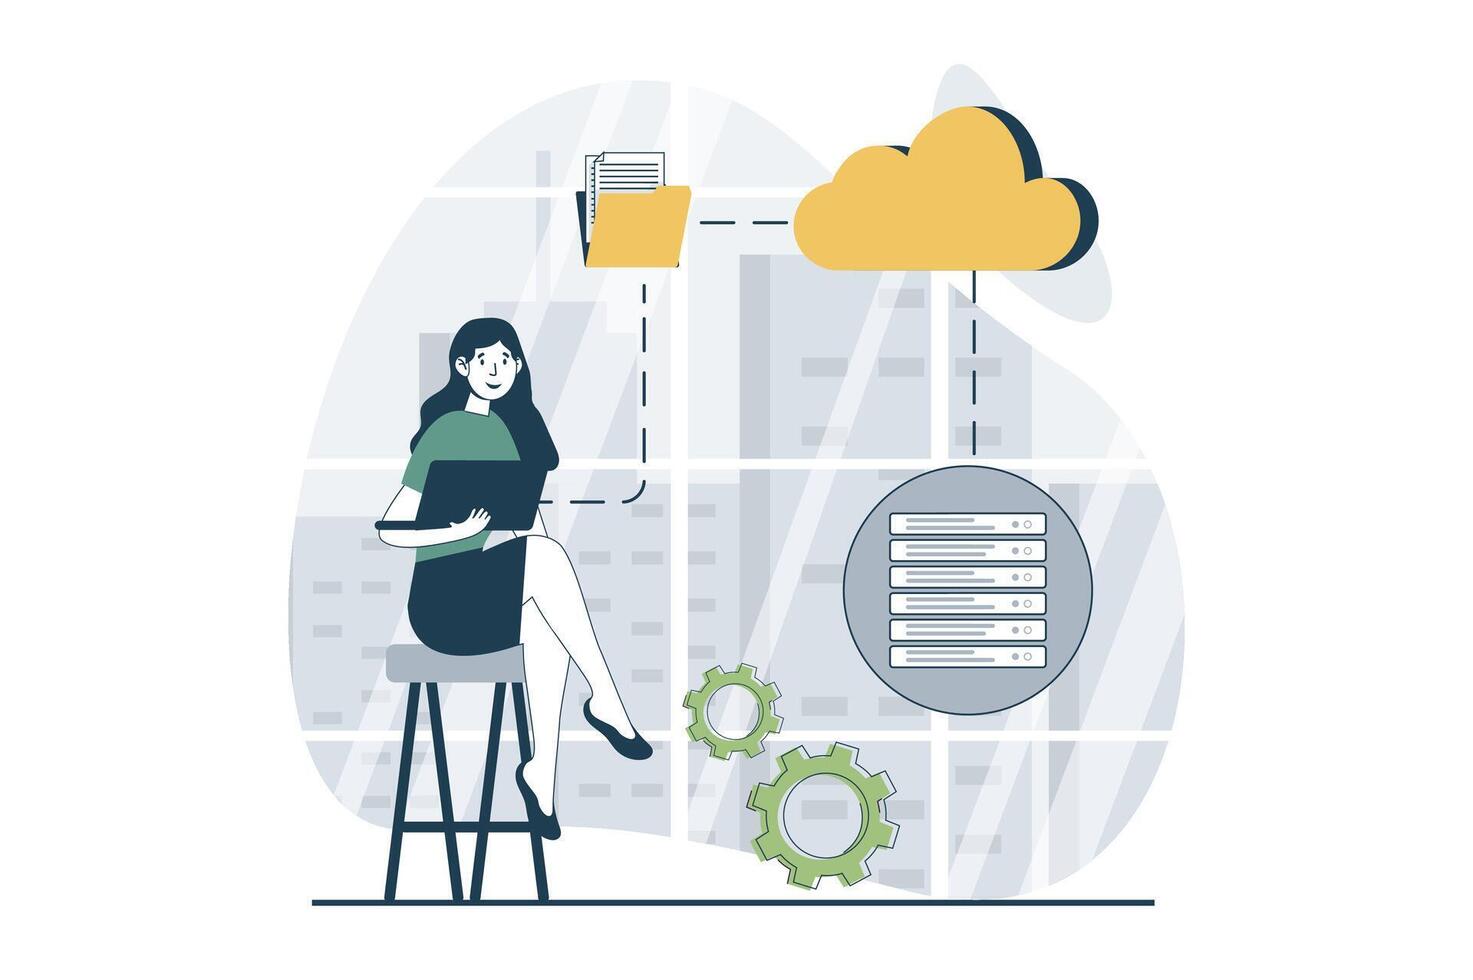 Server maintenance concept with people scene in flat design for web. Woman makes optimization workflow of datacenter in rack room. Vector illustration for social media banner, marketing material.